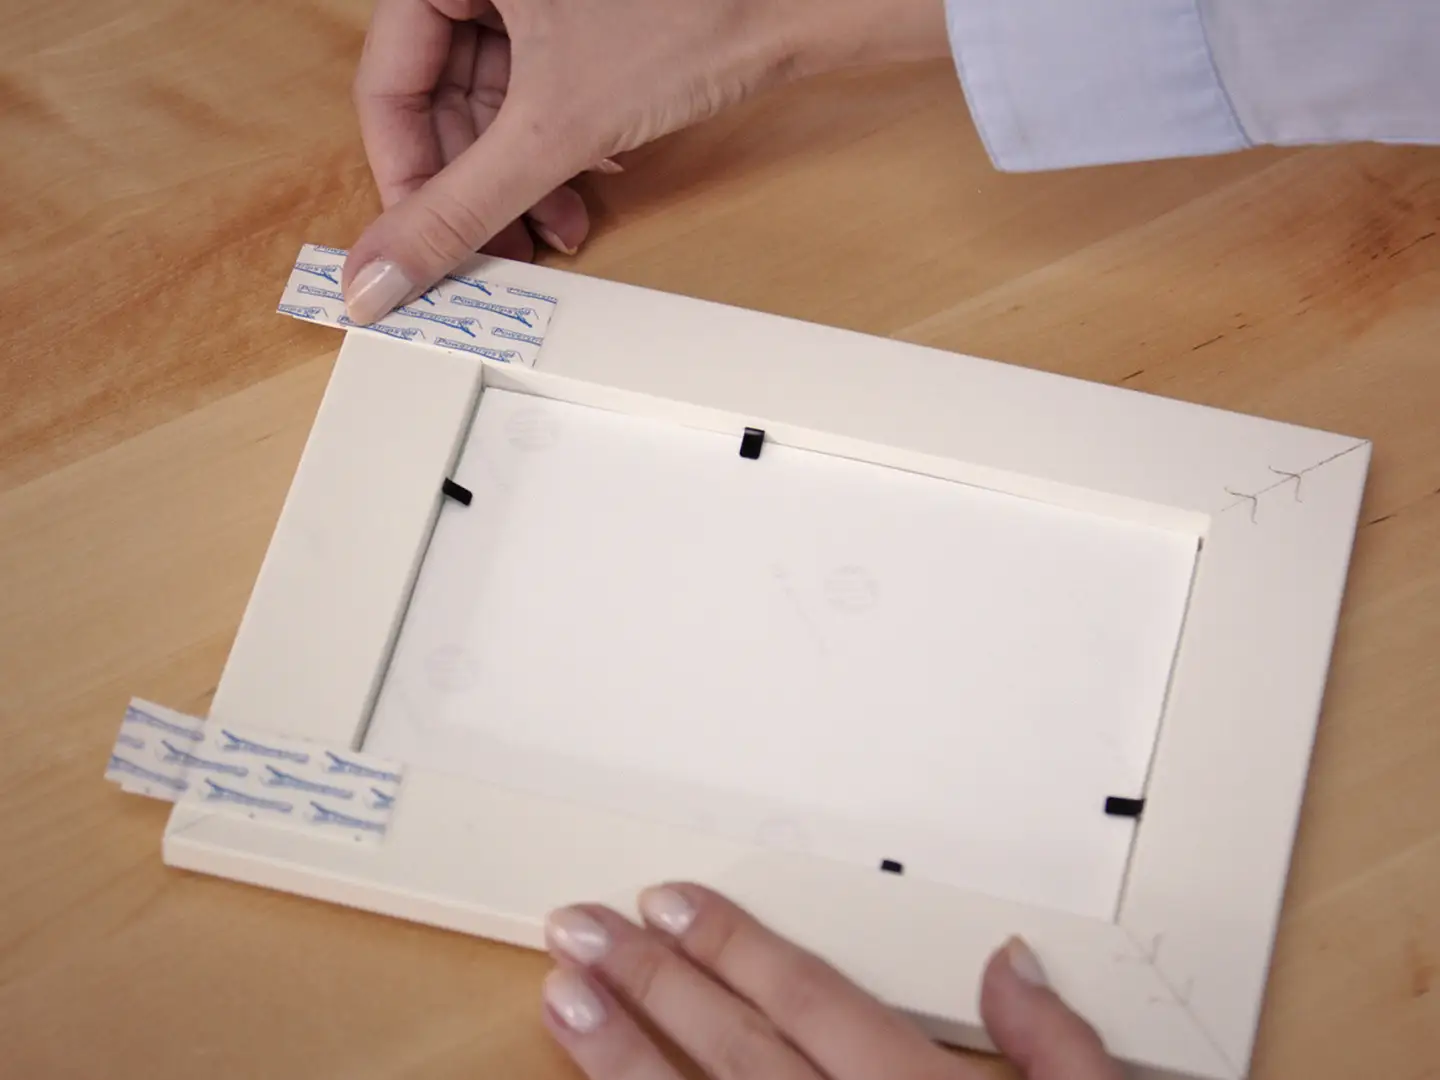 Powerful adhesive strips to directly mount household objects on walls.